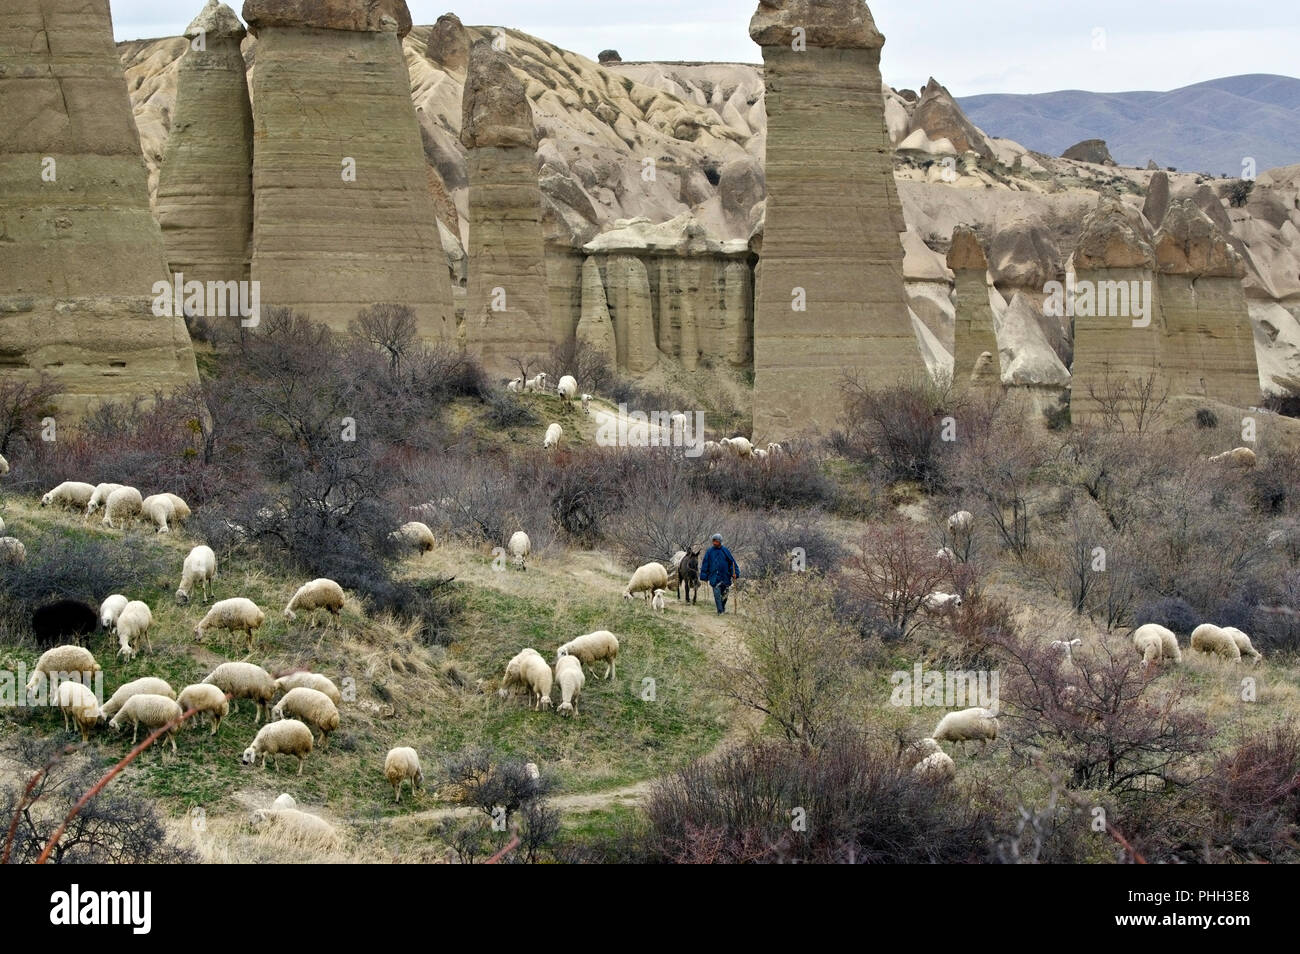 Sheppard with sheep and donkey walking through Love Valley in Cappadocia, Turkey Stock Photo